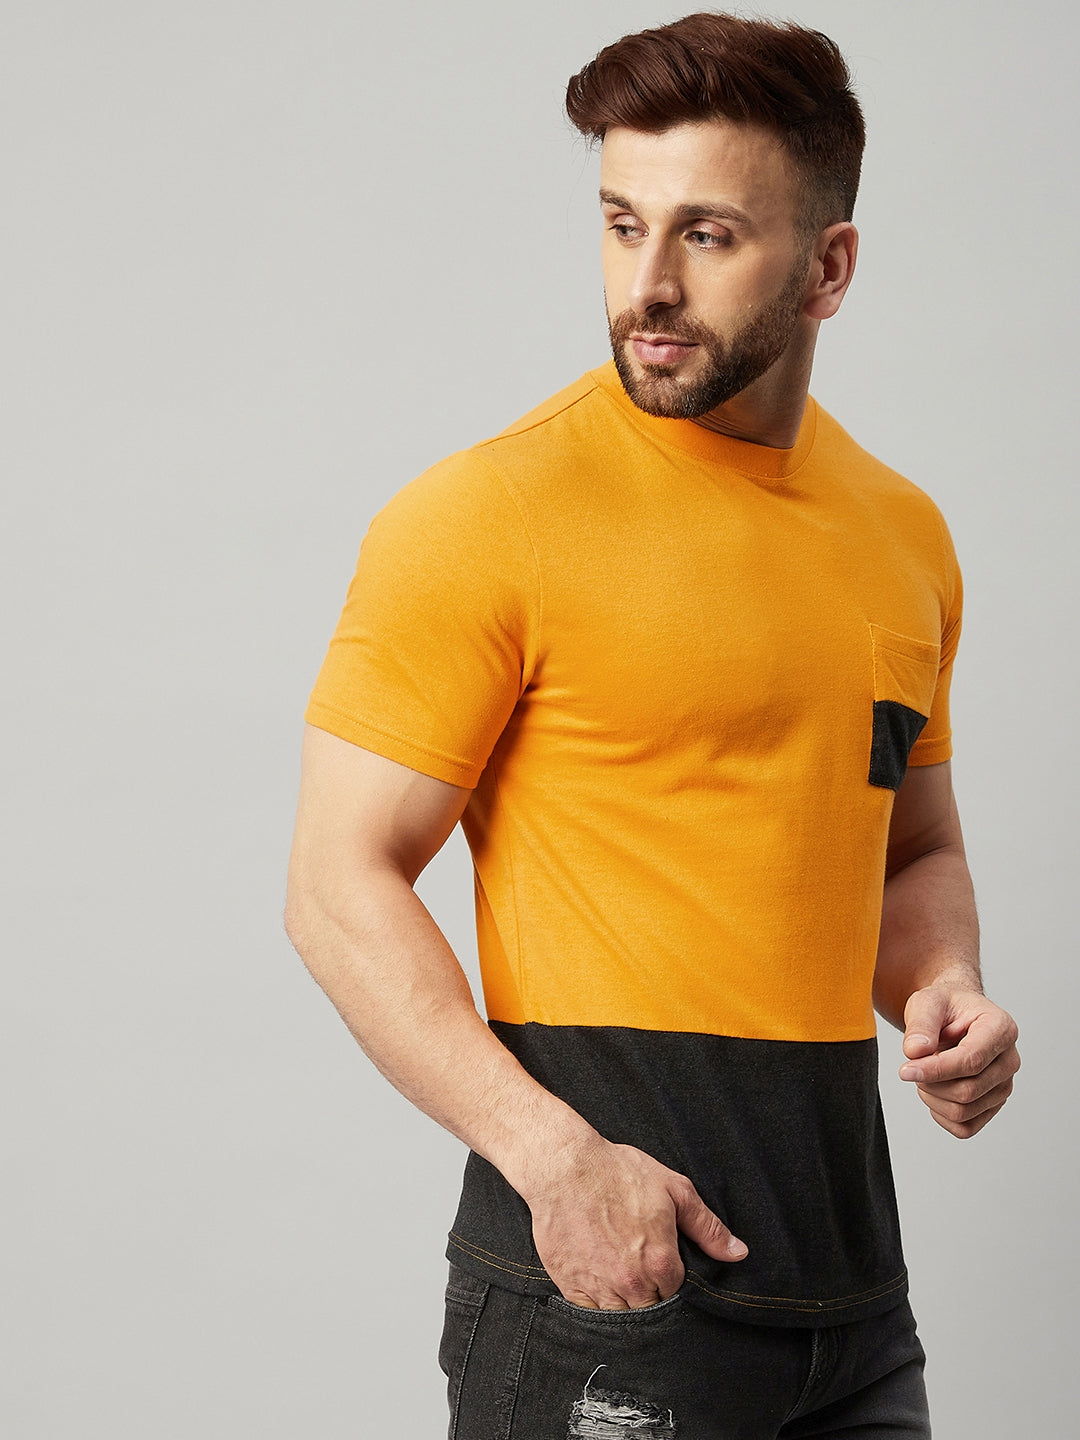 Yellow and Dark Grey Round Neck  Color Block T-Shirt